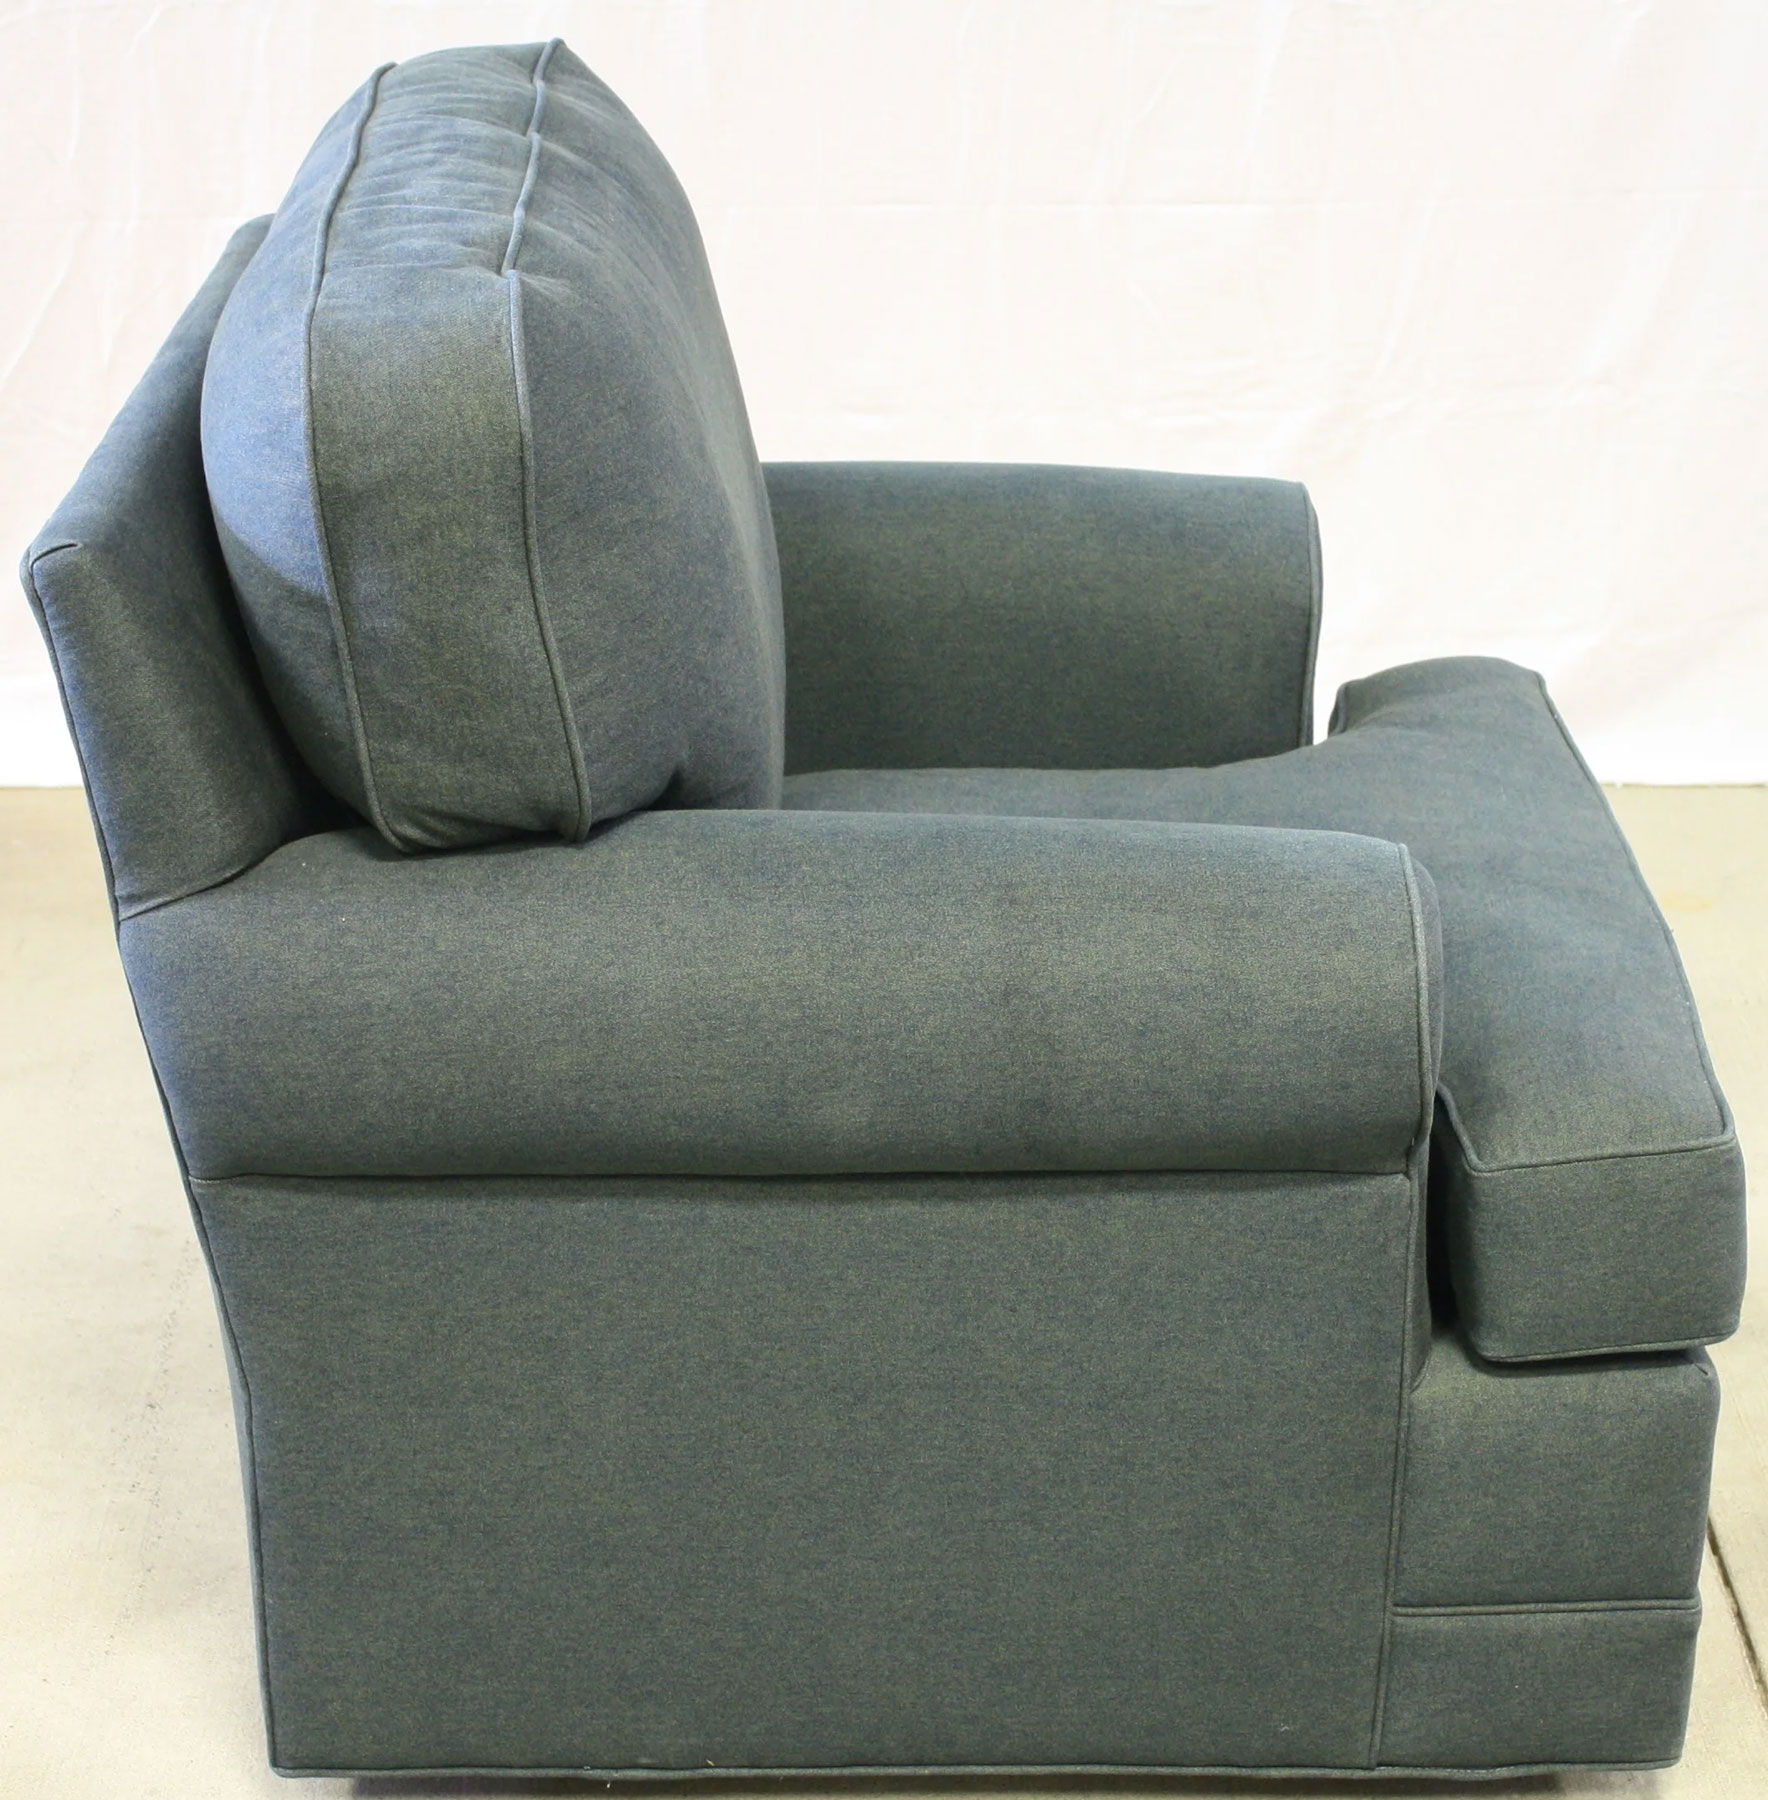 Temple Tailor Made Swivel Chair in Levi Midnight Fabric